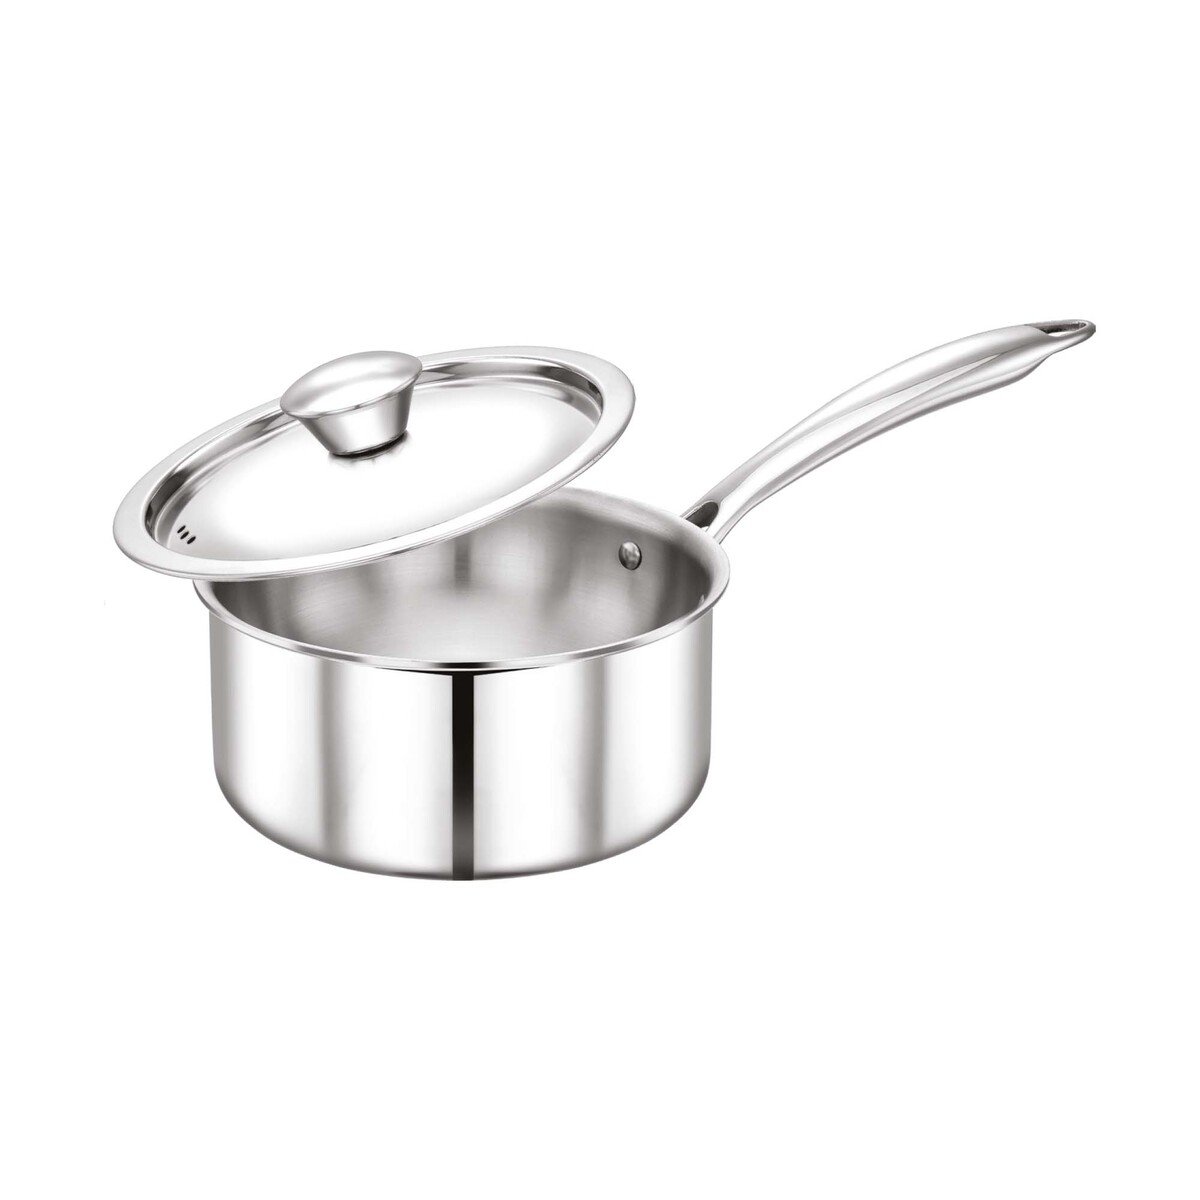 Chefline Stainless Steel Tri-Ply Saucepan With Lid INDR 16cm